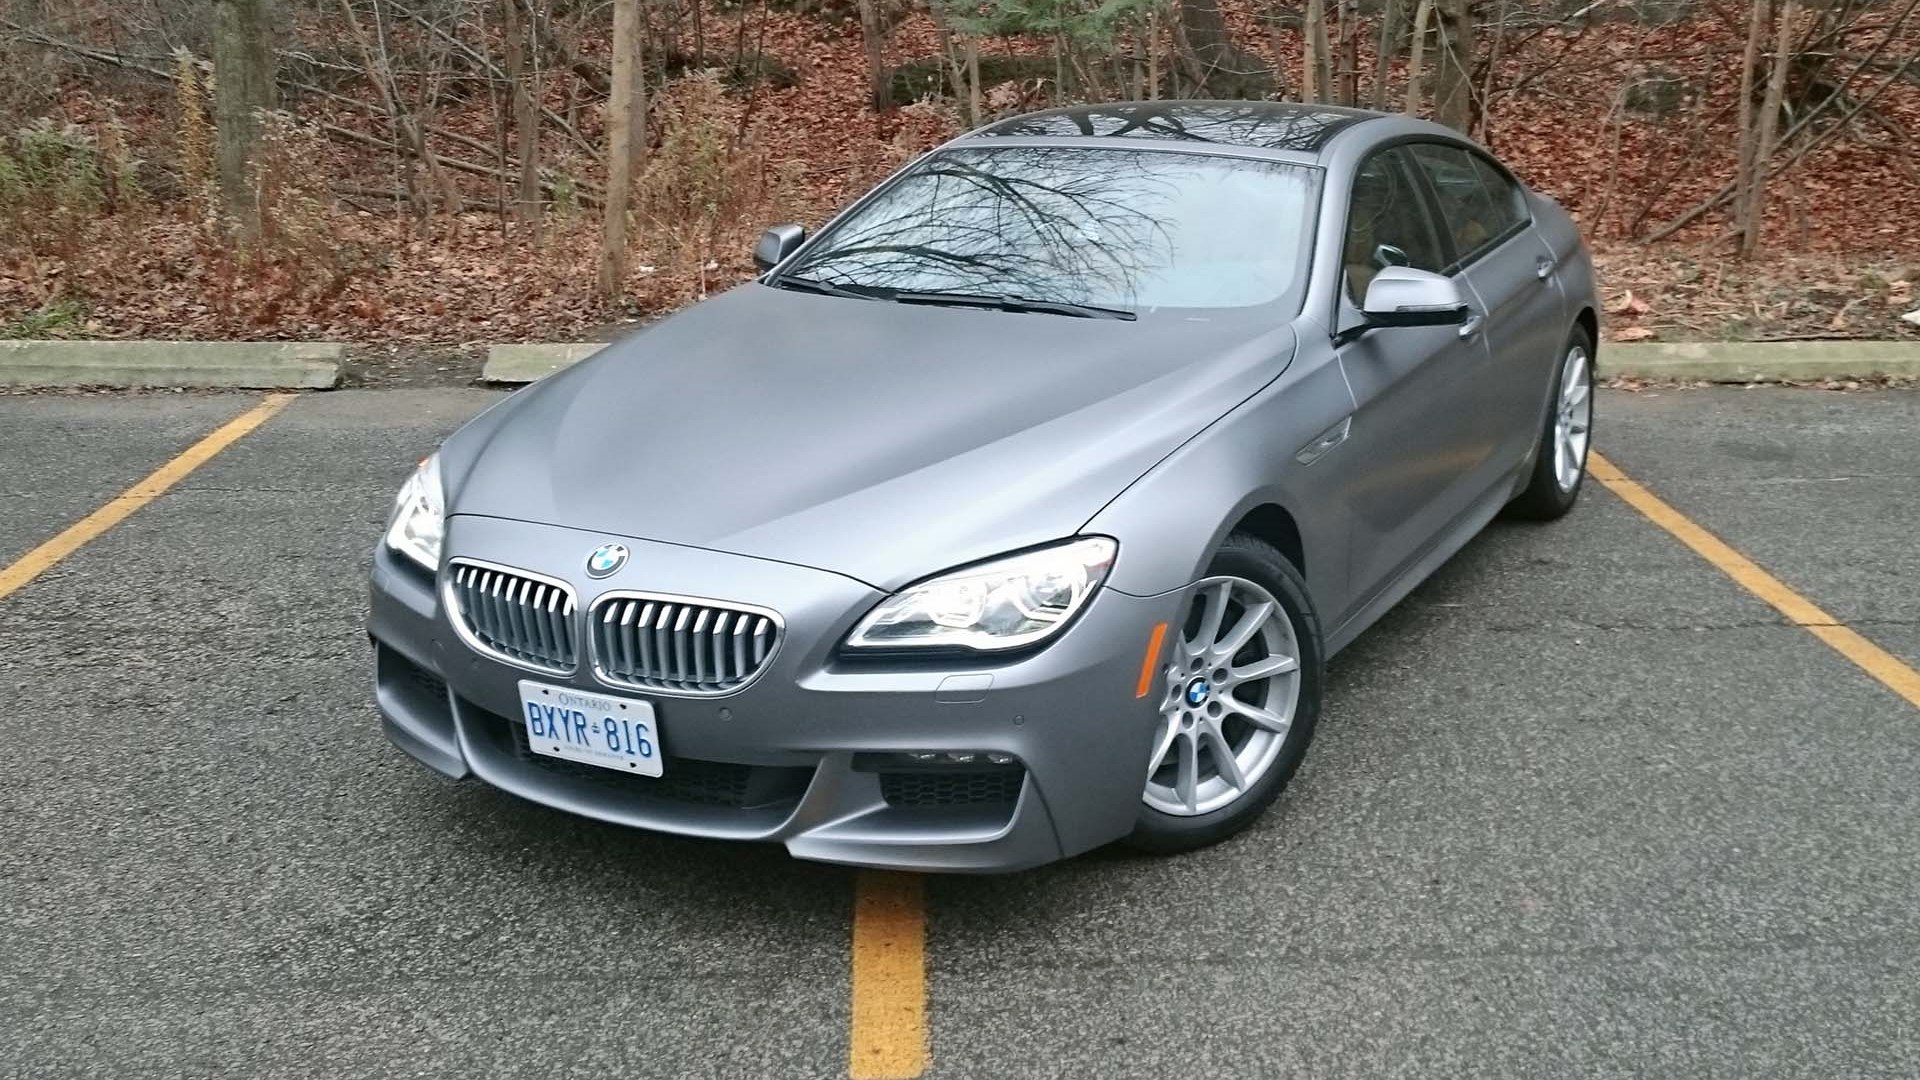 2016 BMW 650i xDrive Gran Coupe Test Drive Review | AutoTrader.ca